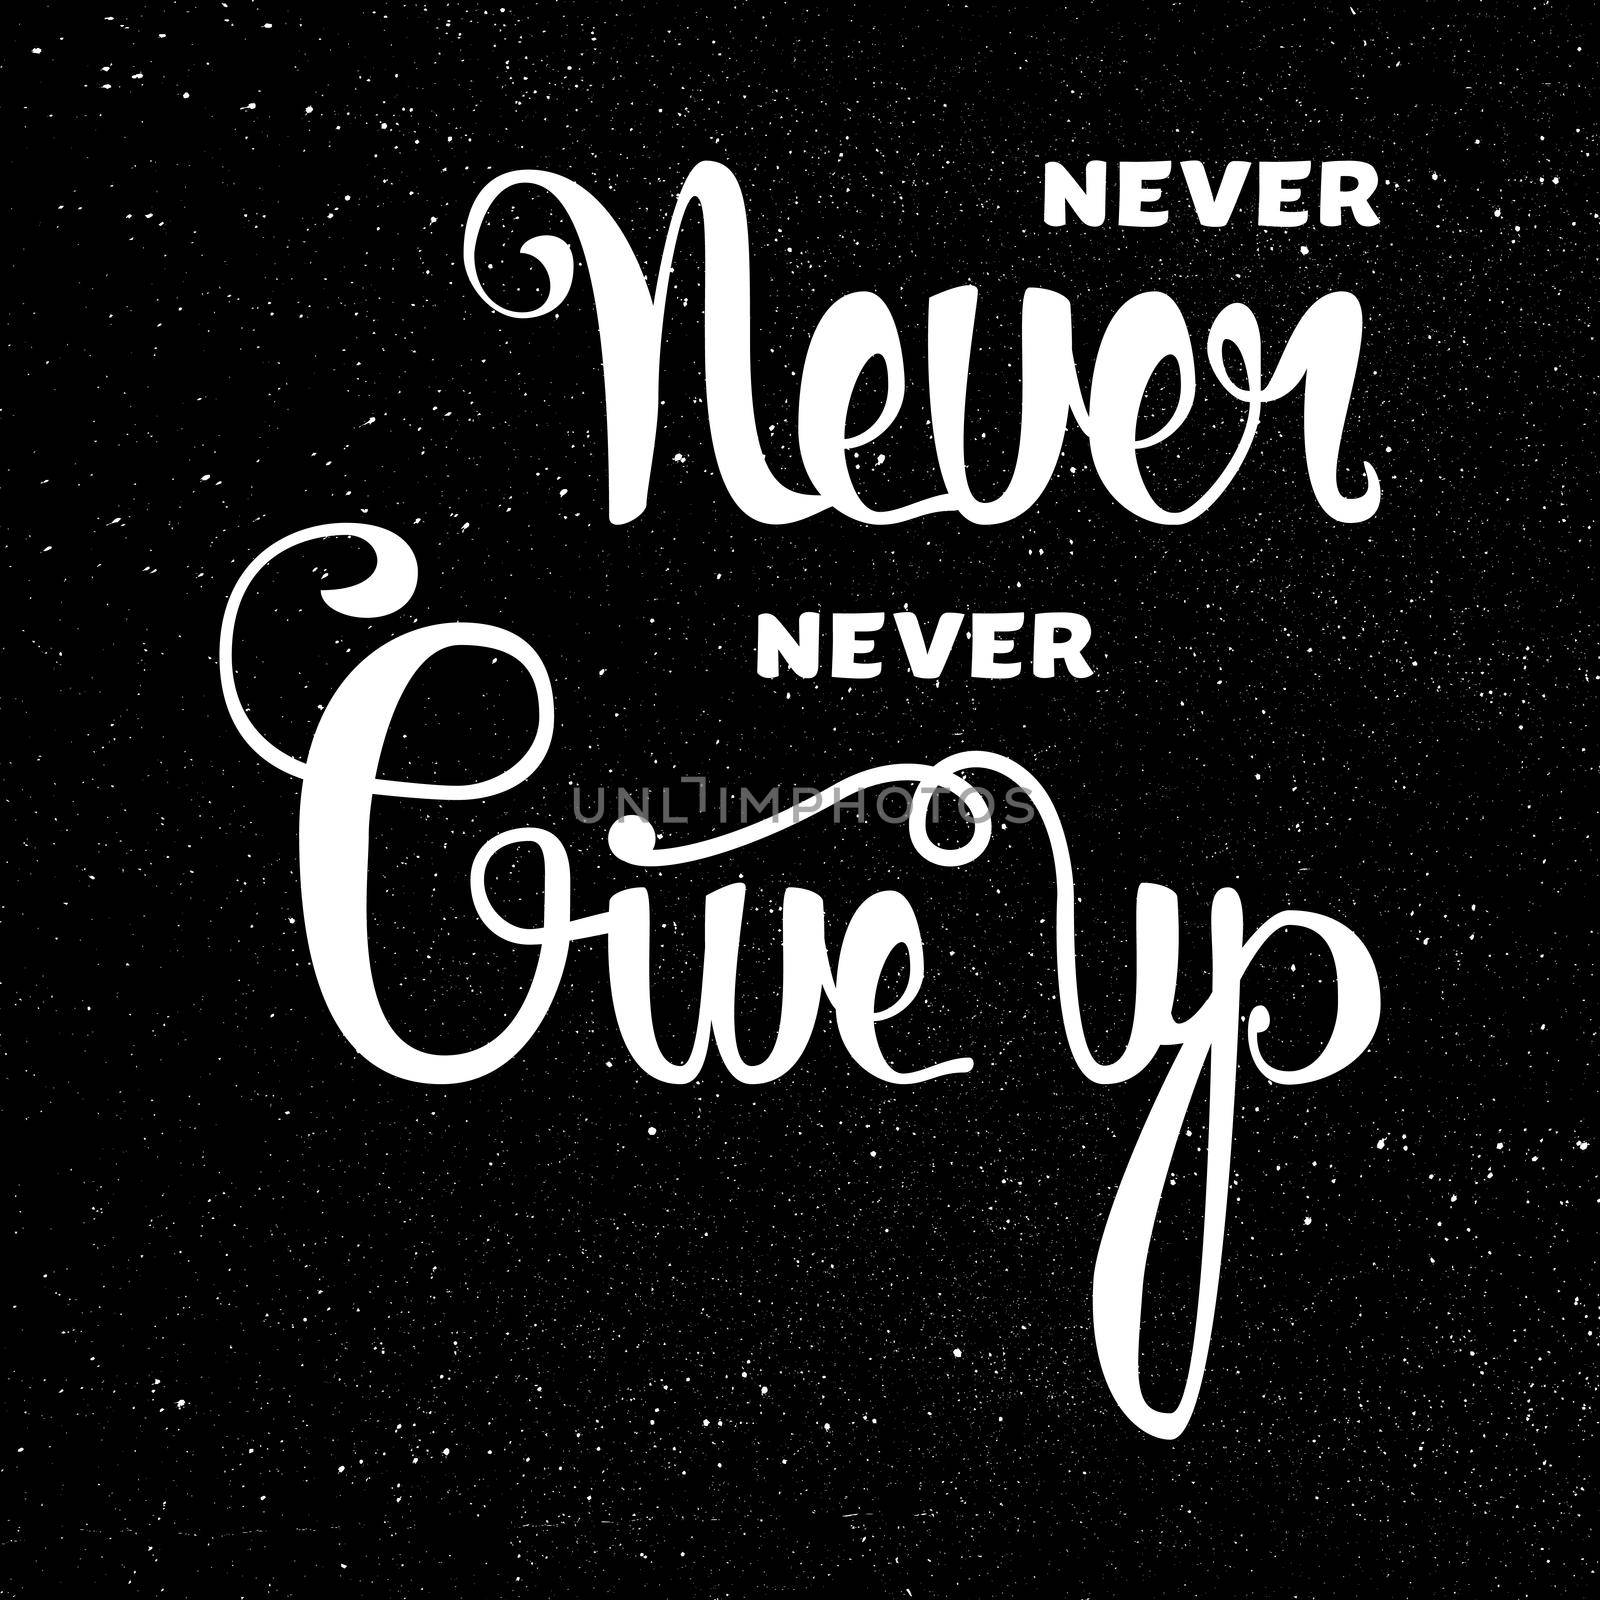 Lettering motivation poster. Never give up. Vintage Calligraphic Text. Inspirational retro quote for fabric, print, invitation, decor, greeting card, poster, design element. Vector